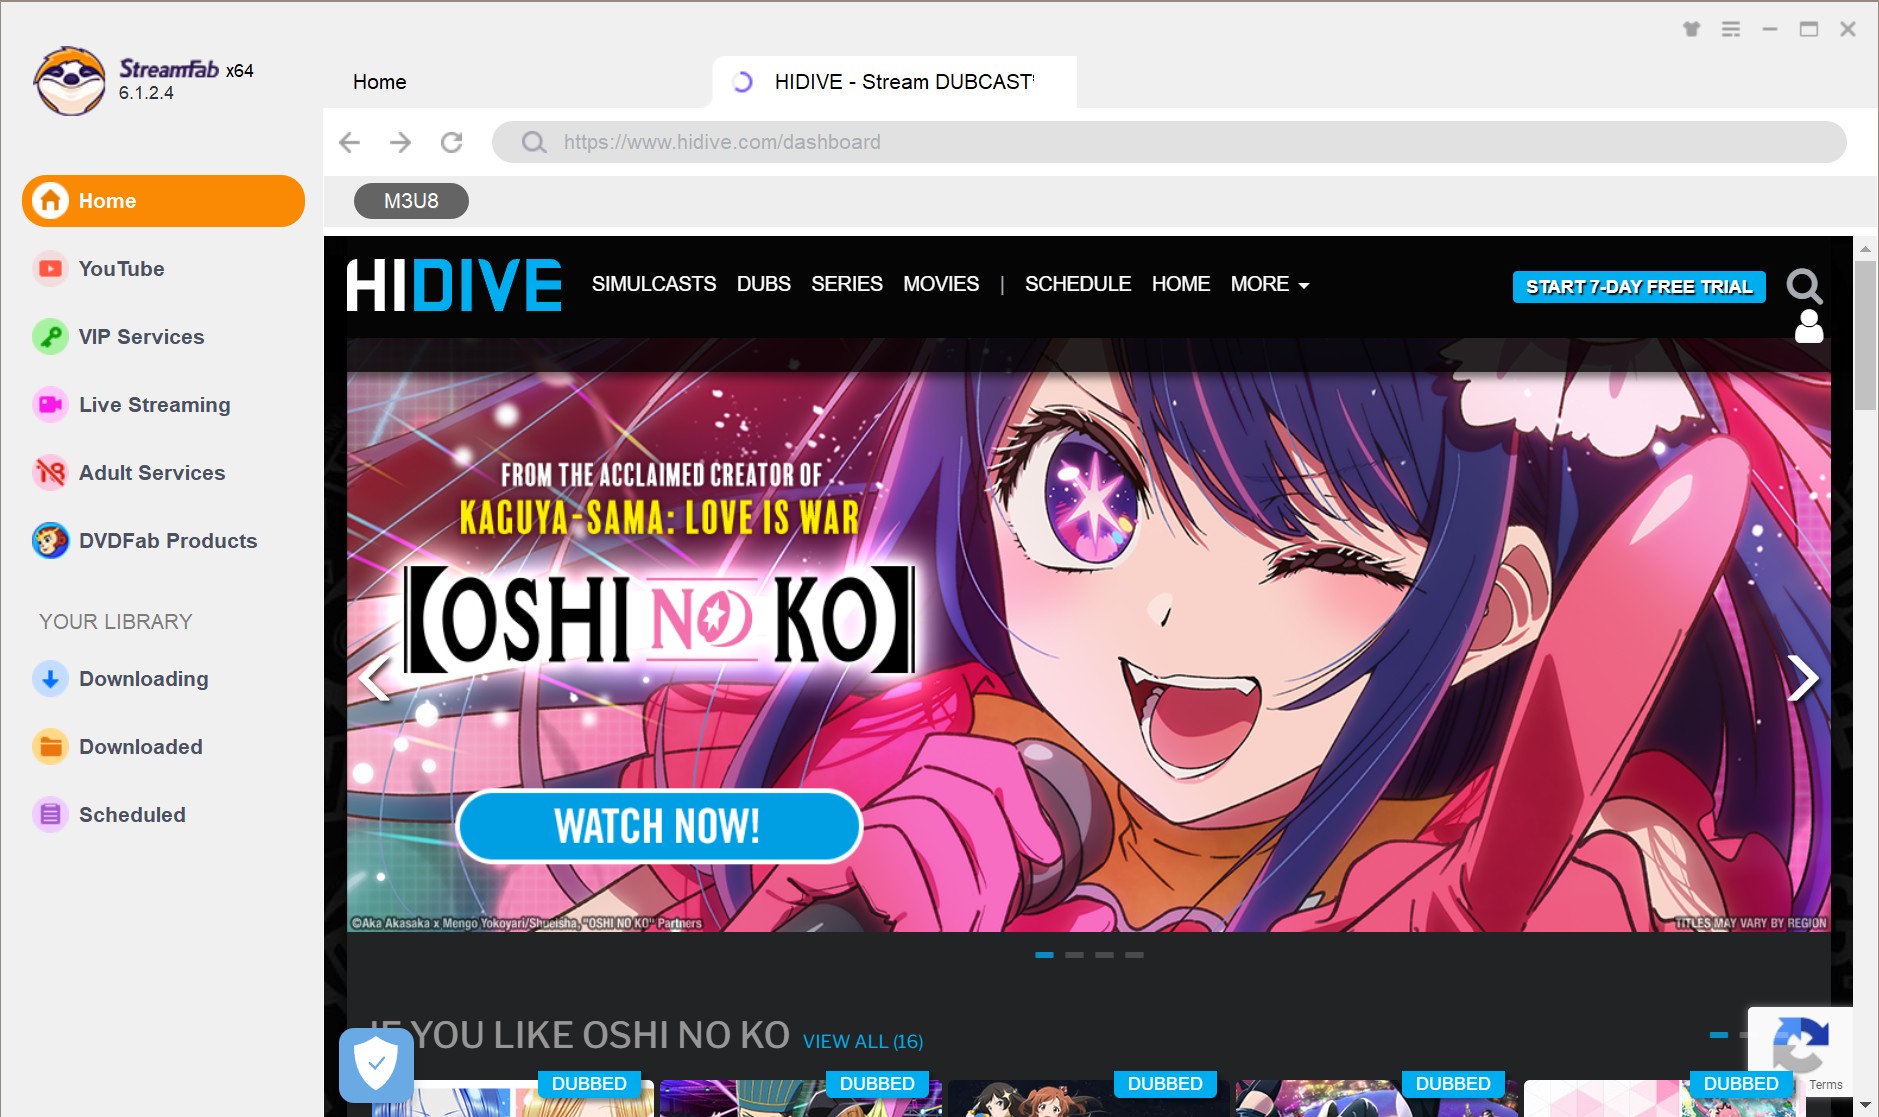 The Ultimate Comparison: Hidive vs Crunchyroll for Anime Lovers